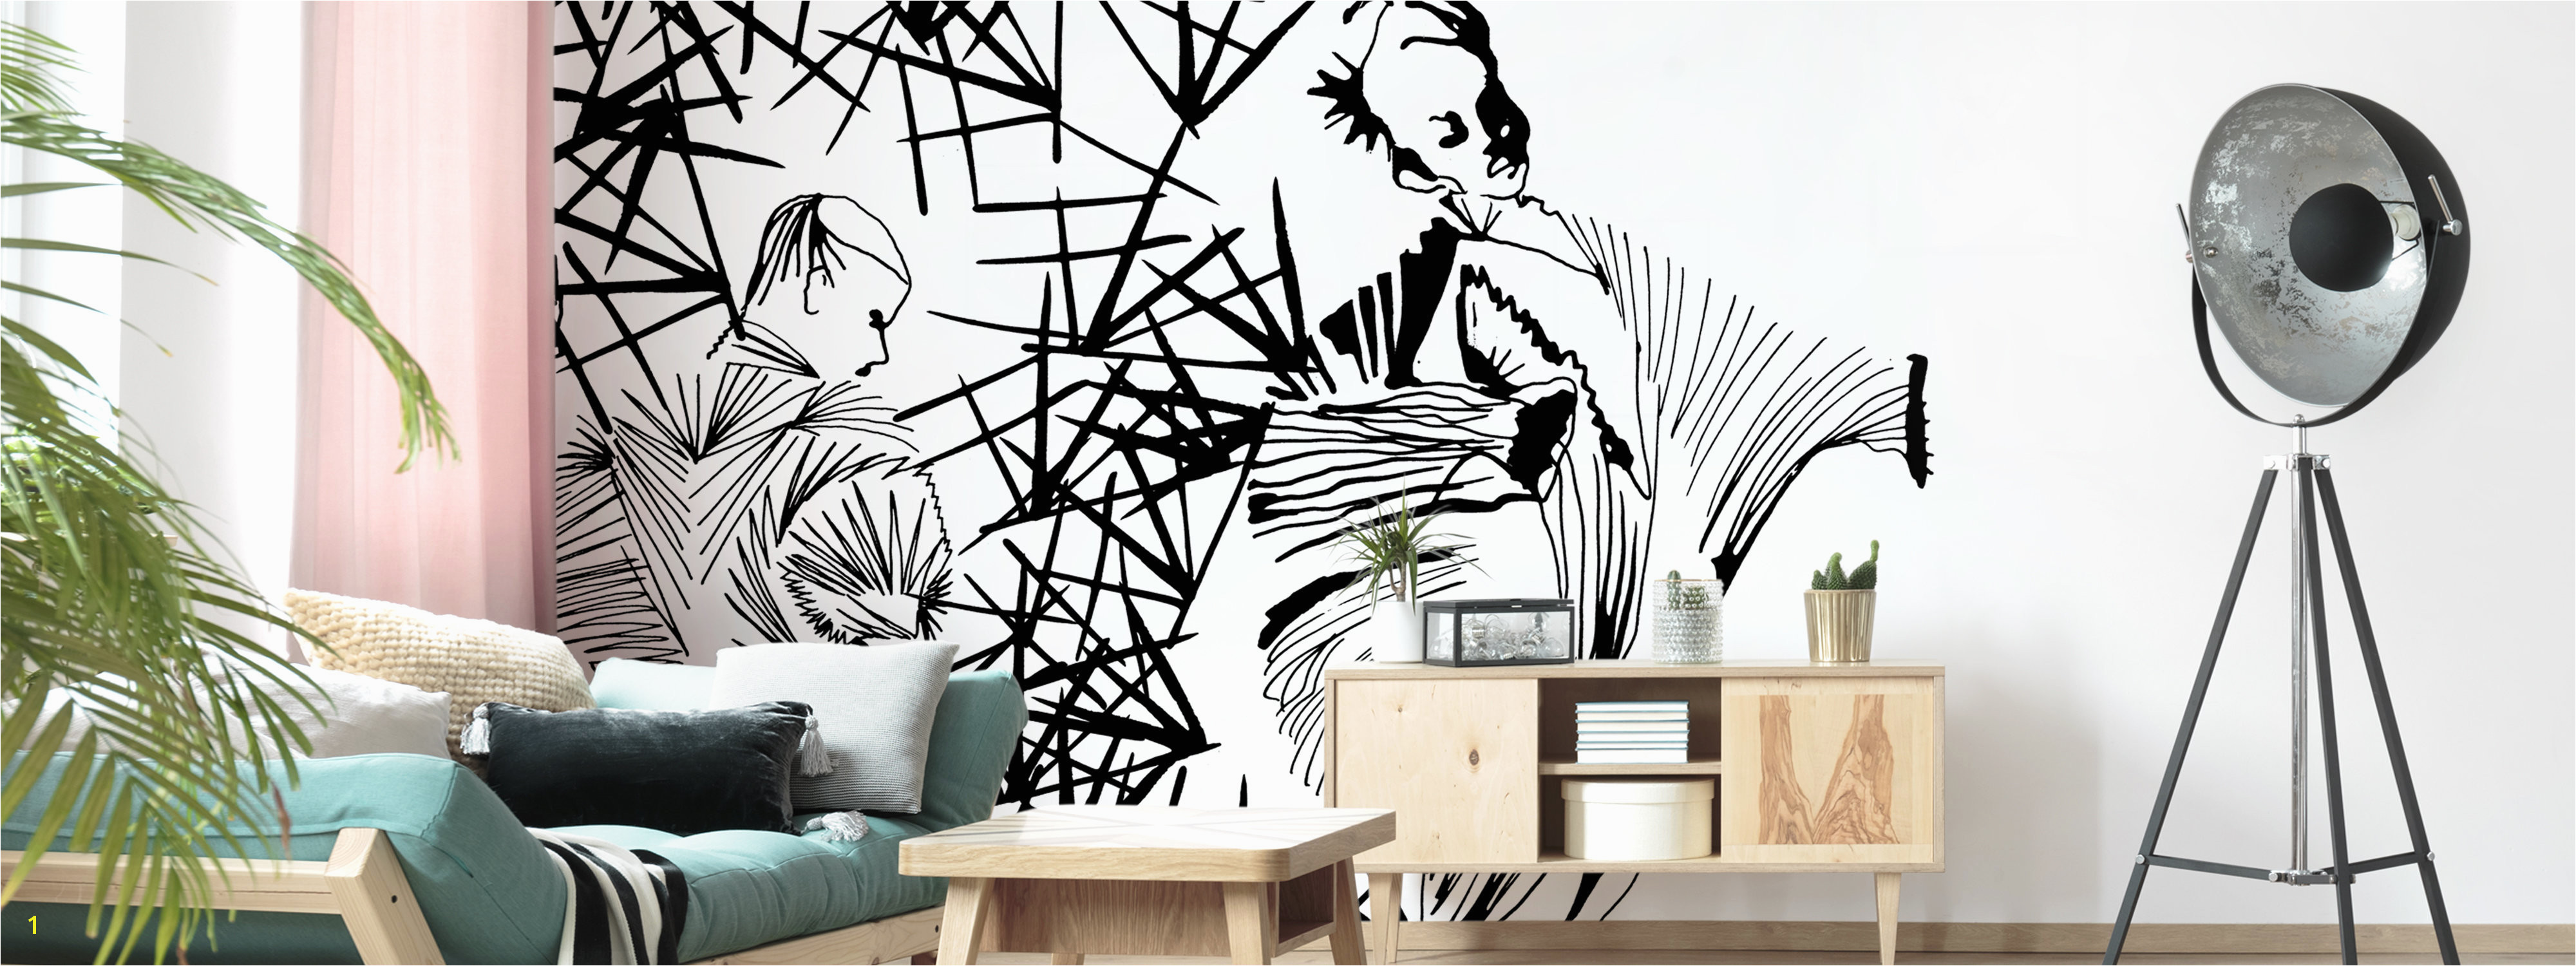 Wall Mural Printing Services Wall Murals Wallpapers and Canvas Prints